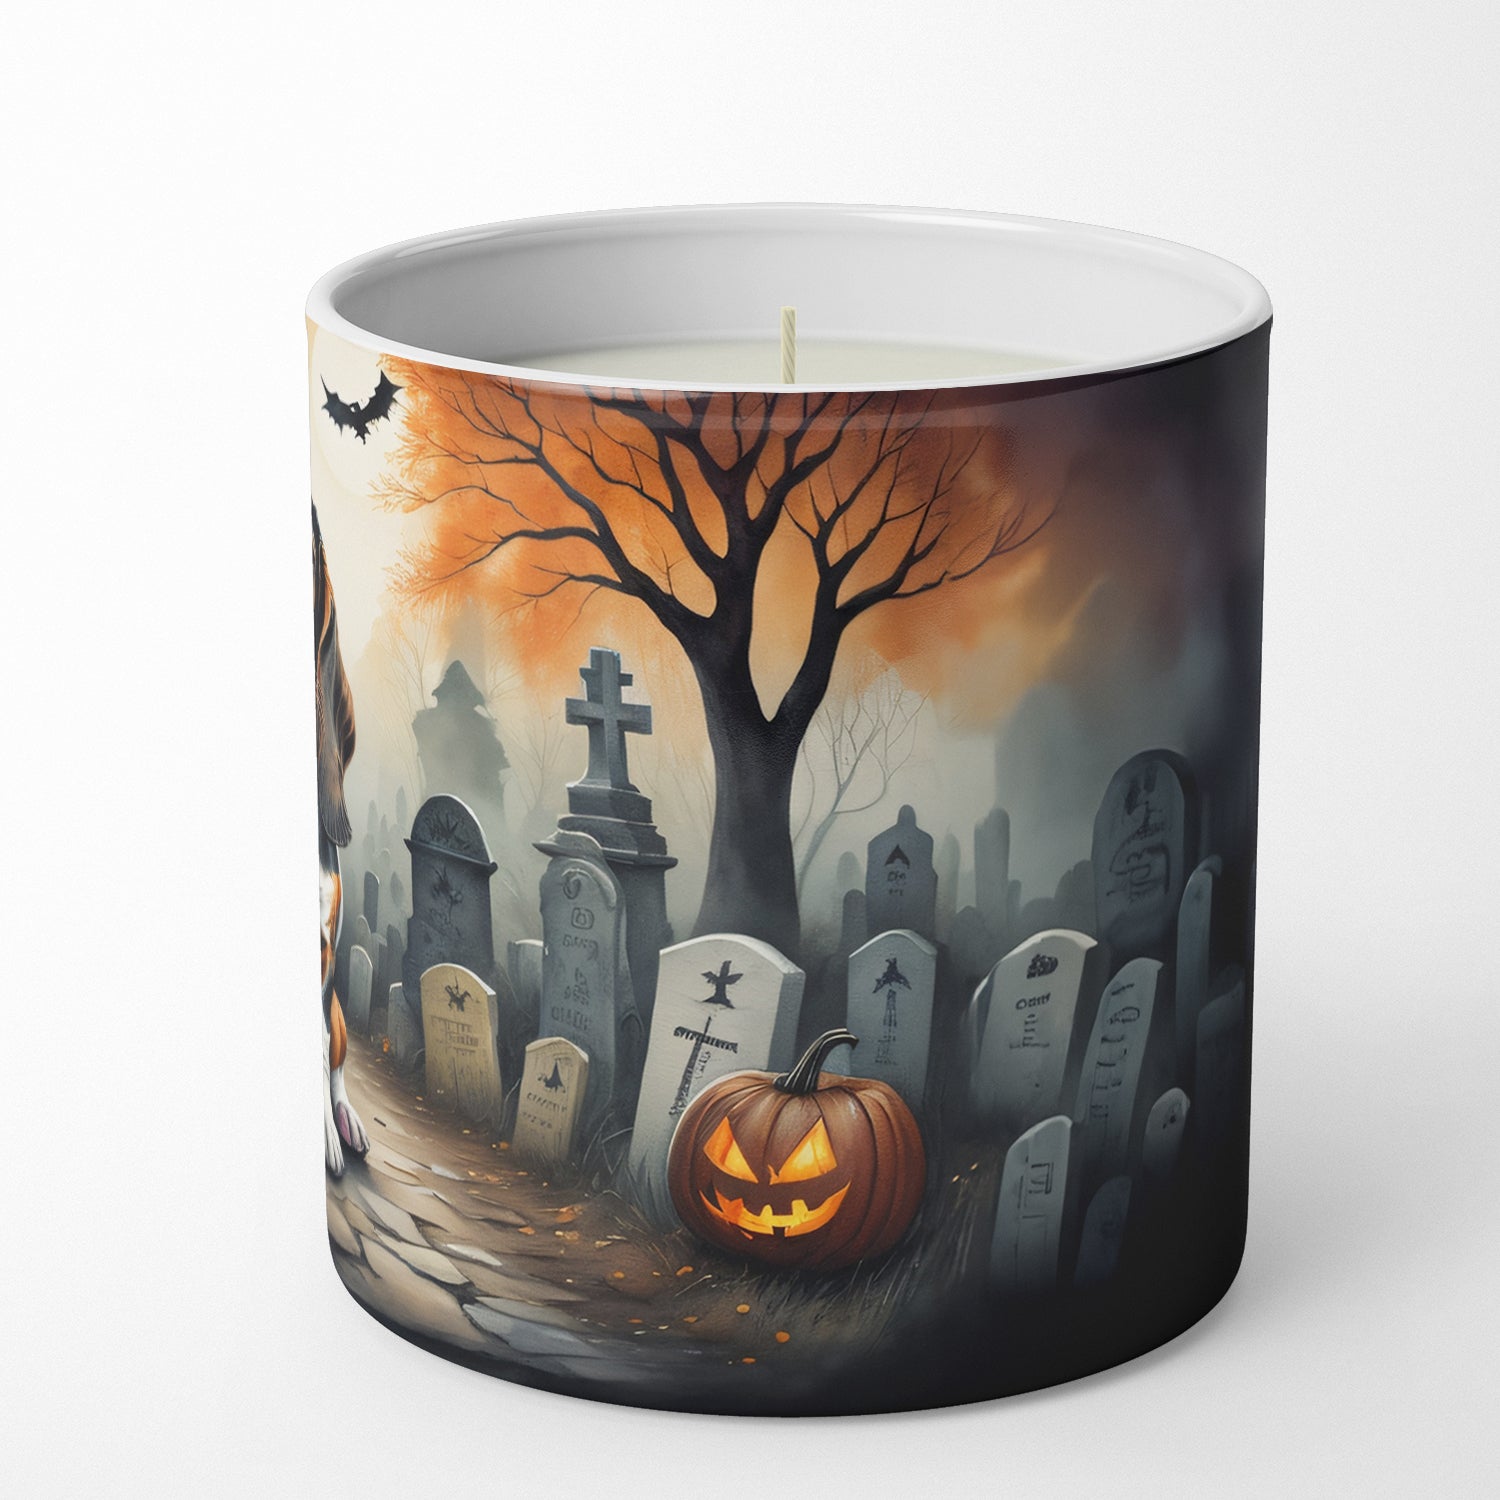 Basset Hound Spooky Halloween Decorative Soy Candle